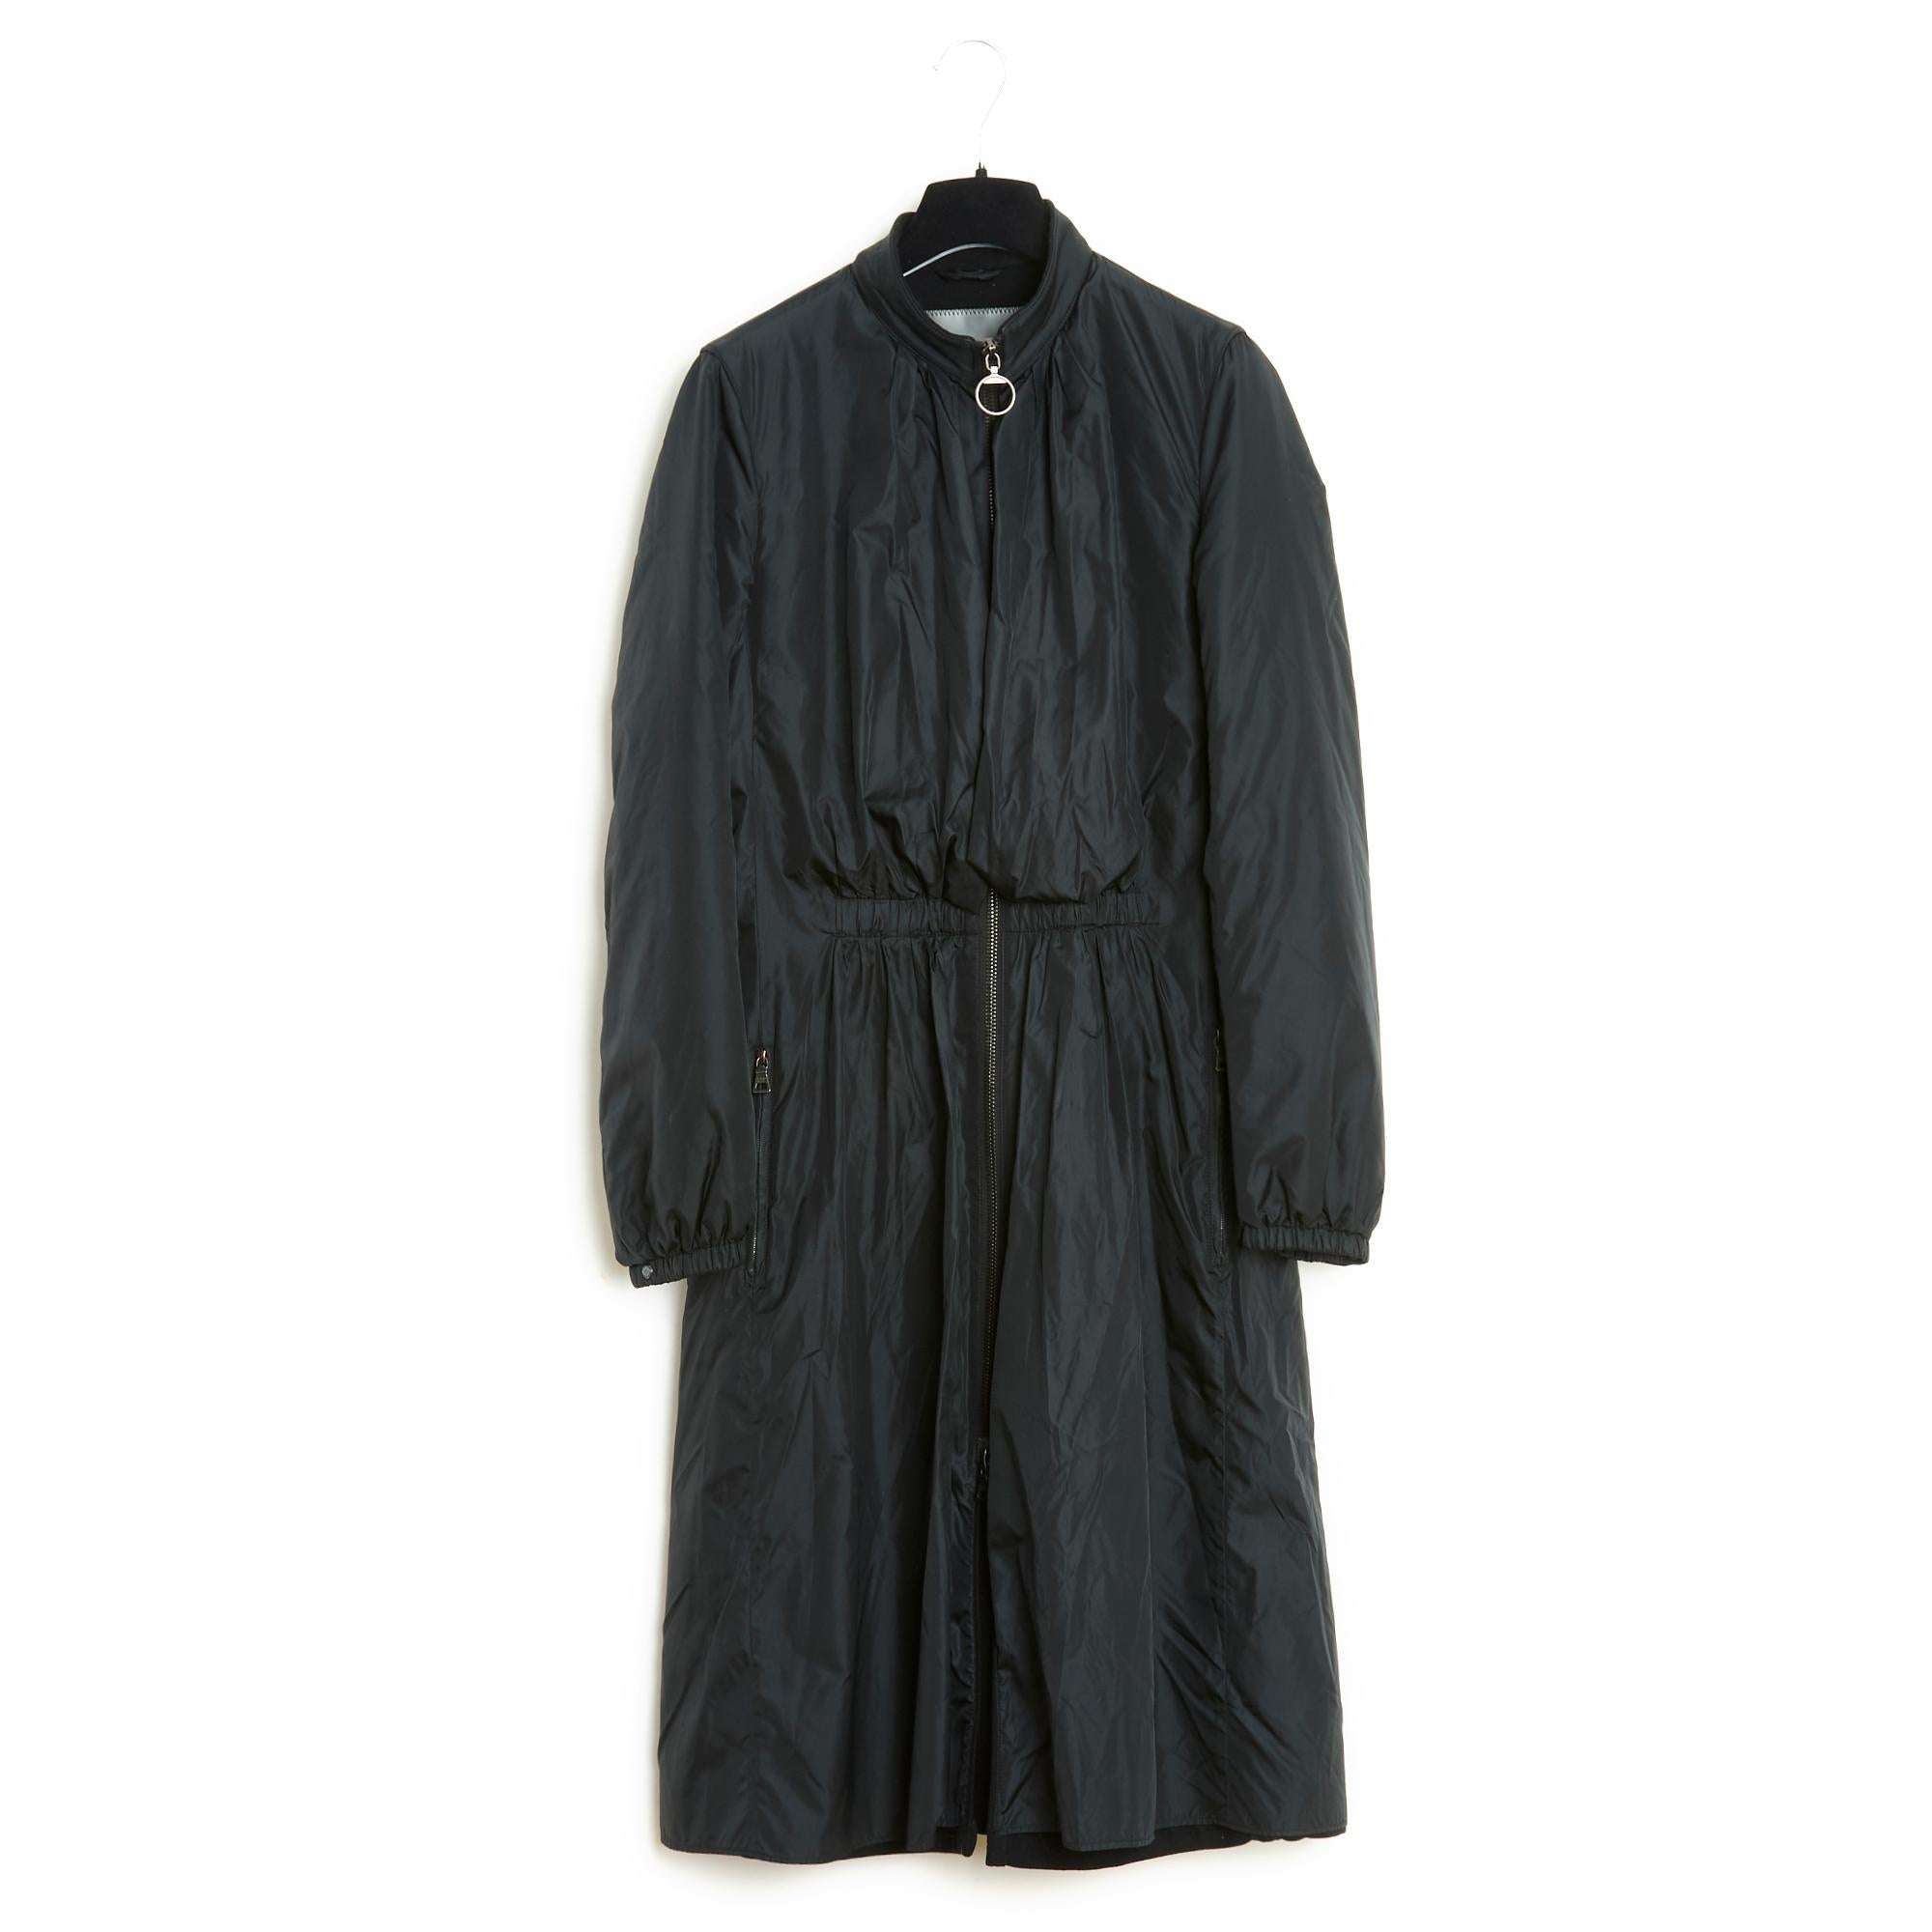 Prada Re-Nylon series coat in black polyester technical canvas, stand-up collar embellished with a black removable fur collar with buttoned closing tab, technical canvas lined and draped over the bust, long double-slider zip at the front, elastic